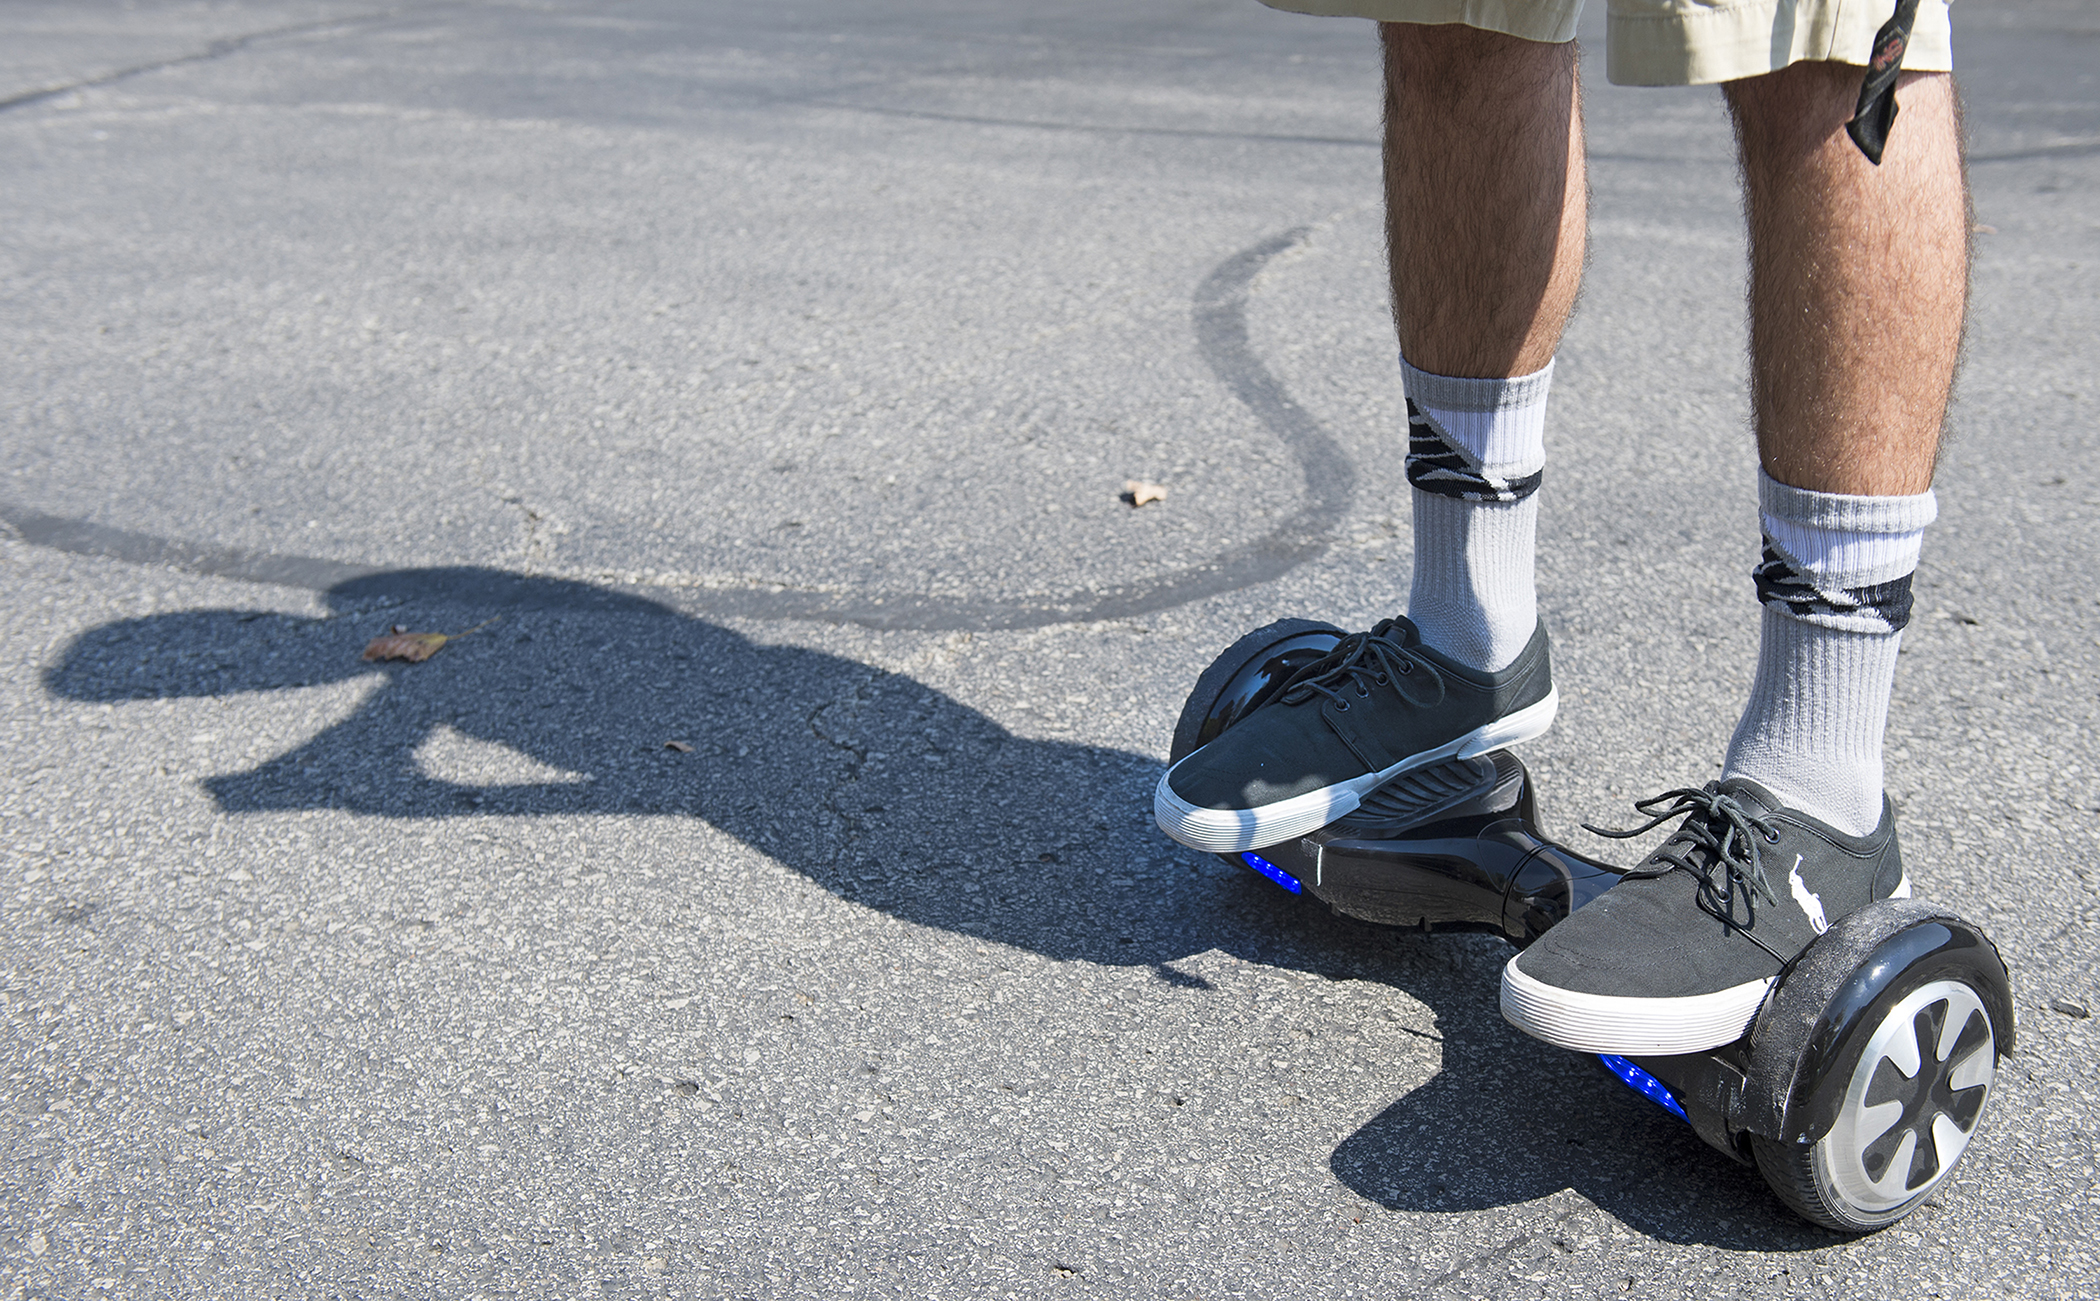 Hoverboards Banned due to Safety Concerns